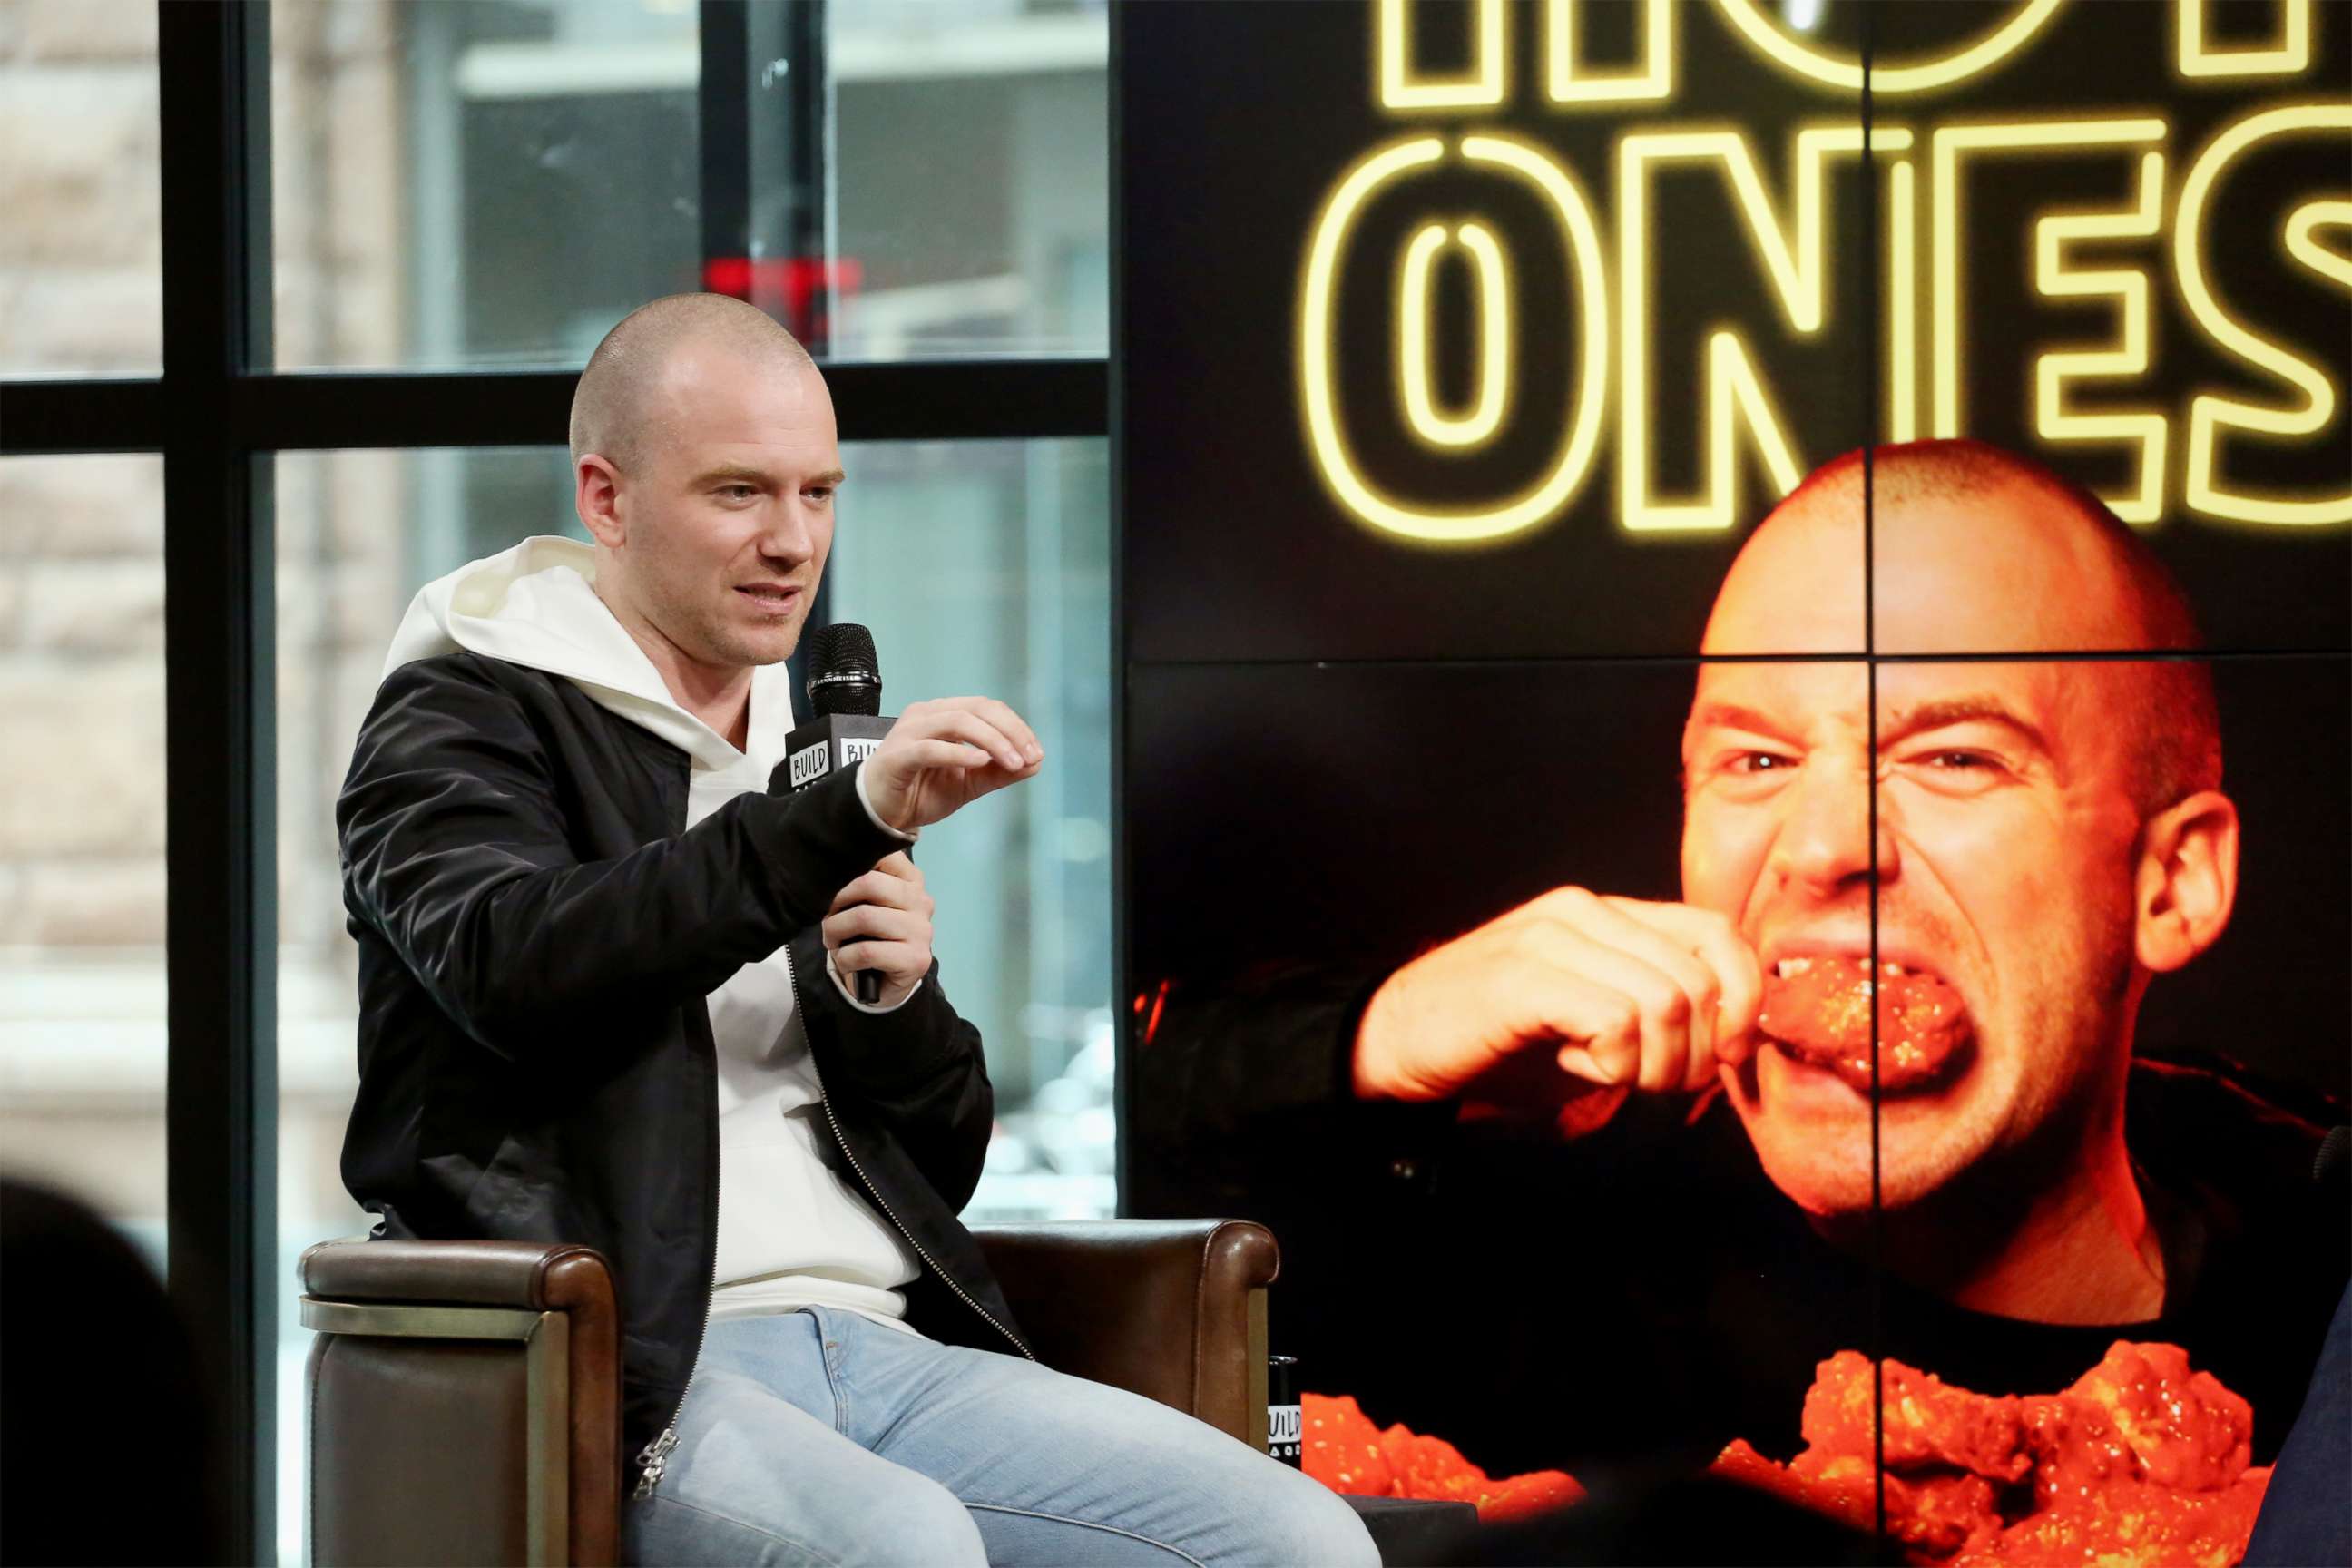 PHOTO: Sean Evans visits Build to discuss "Hot Ones" on June 8, 2017, in New York City.